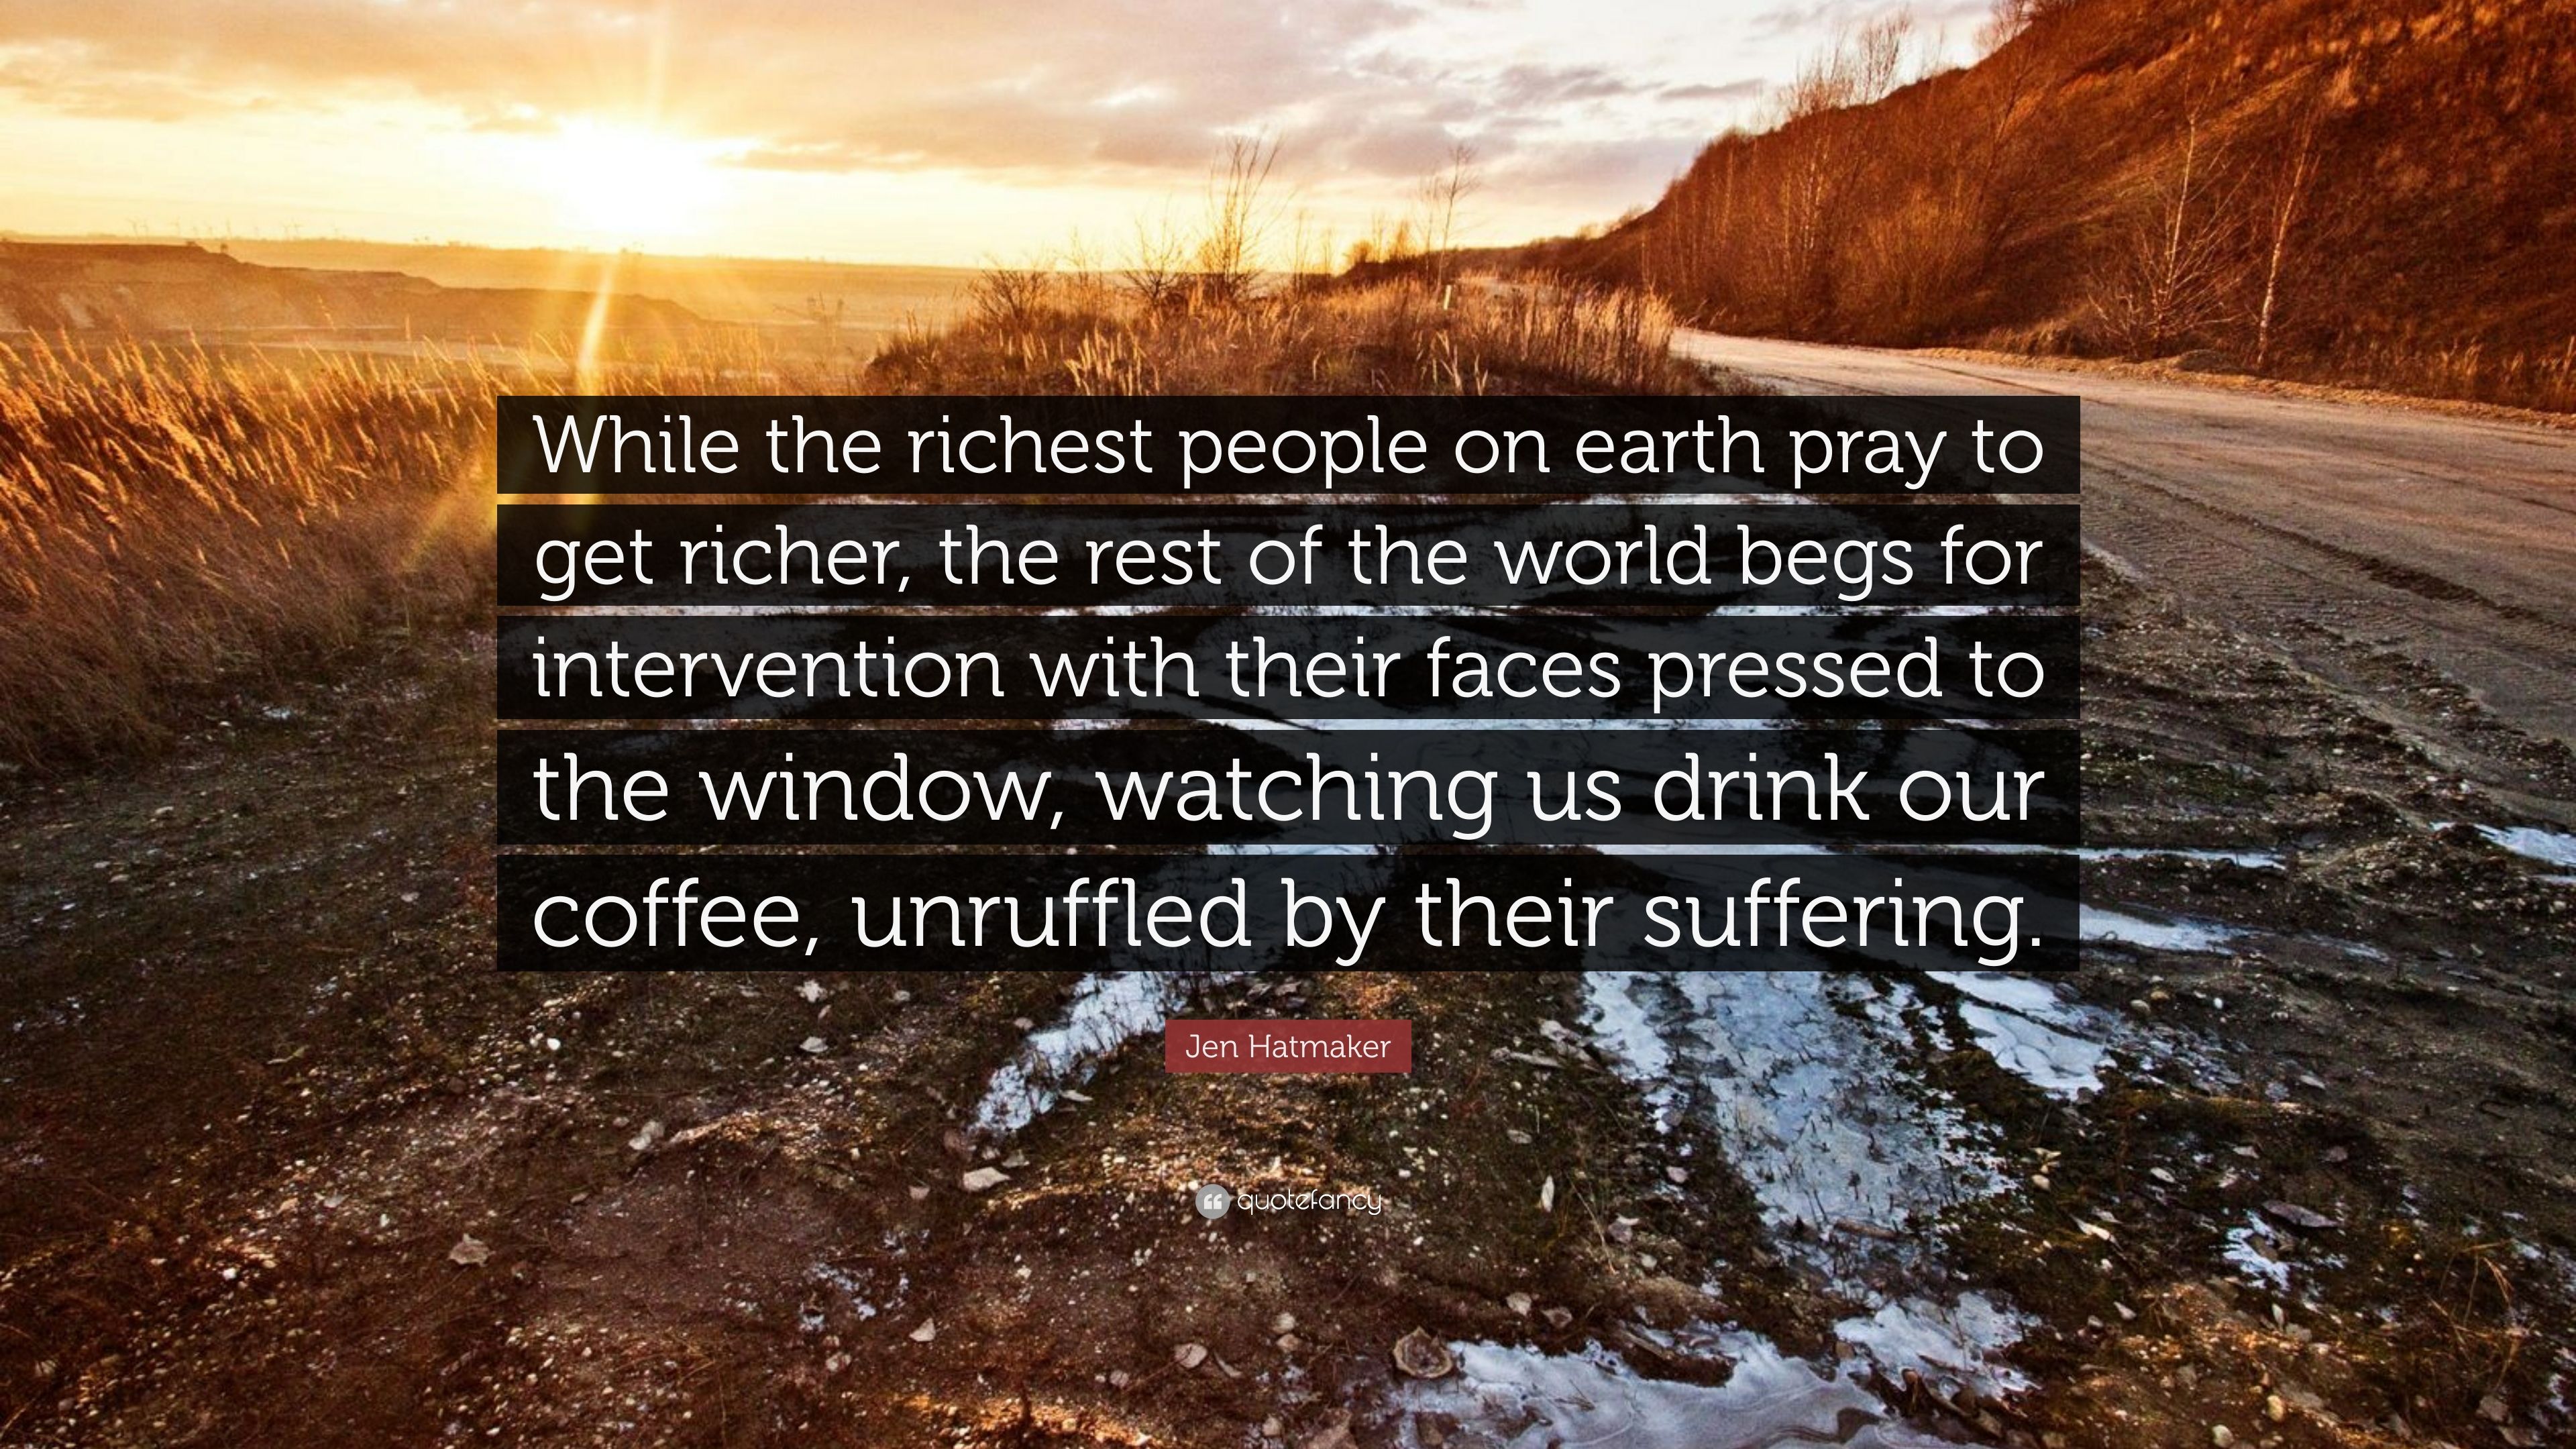 Jen Hatmaker Quote: “While the richest people on earth pray to get